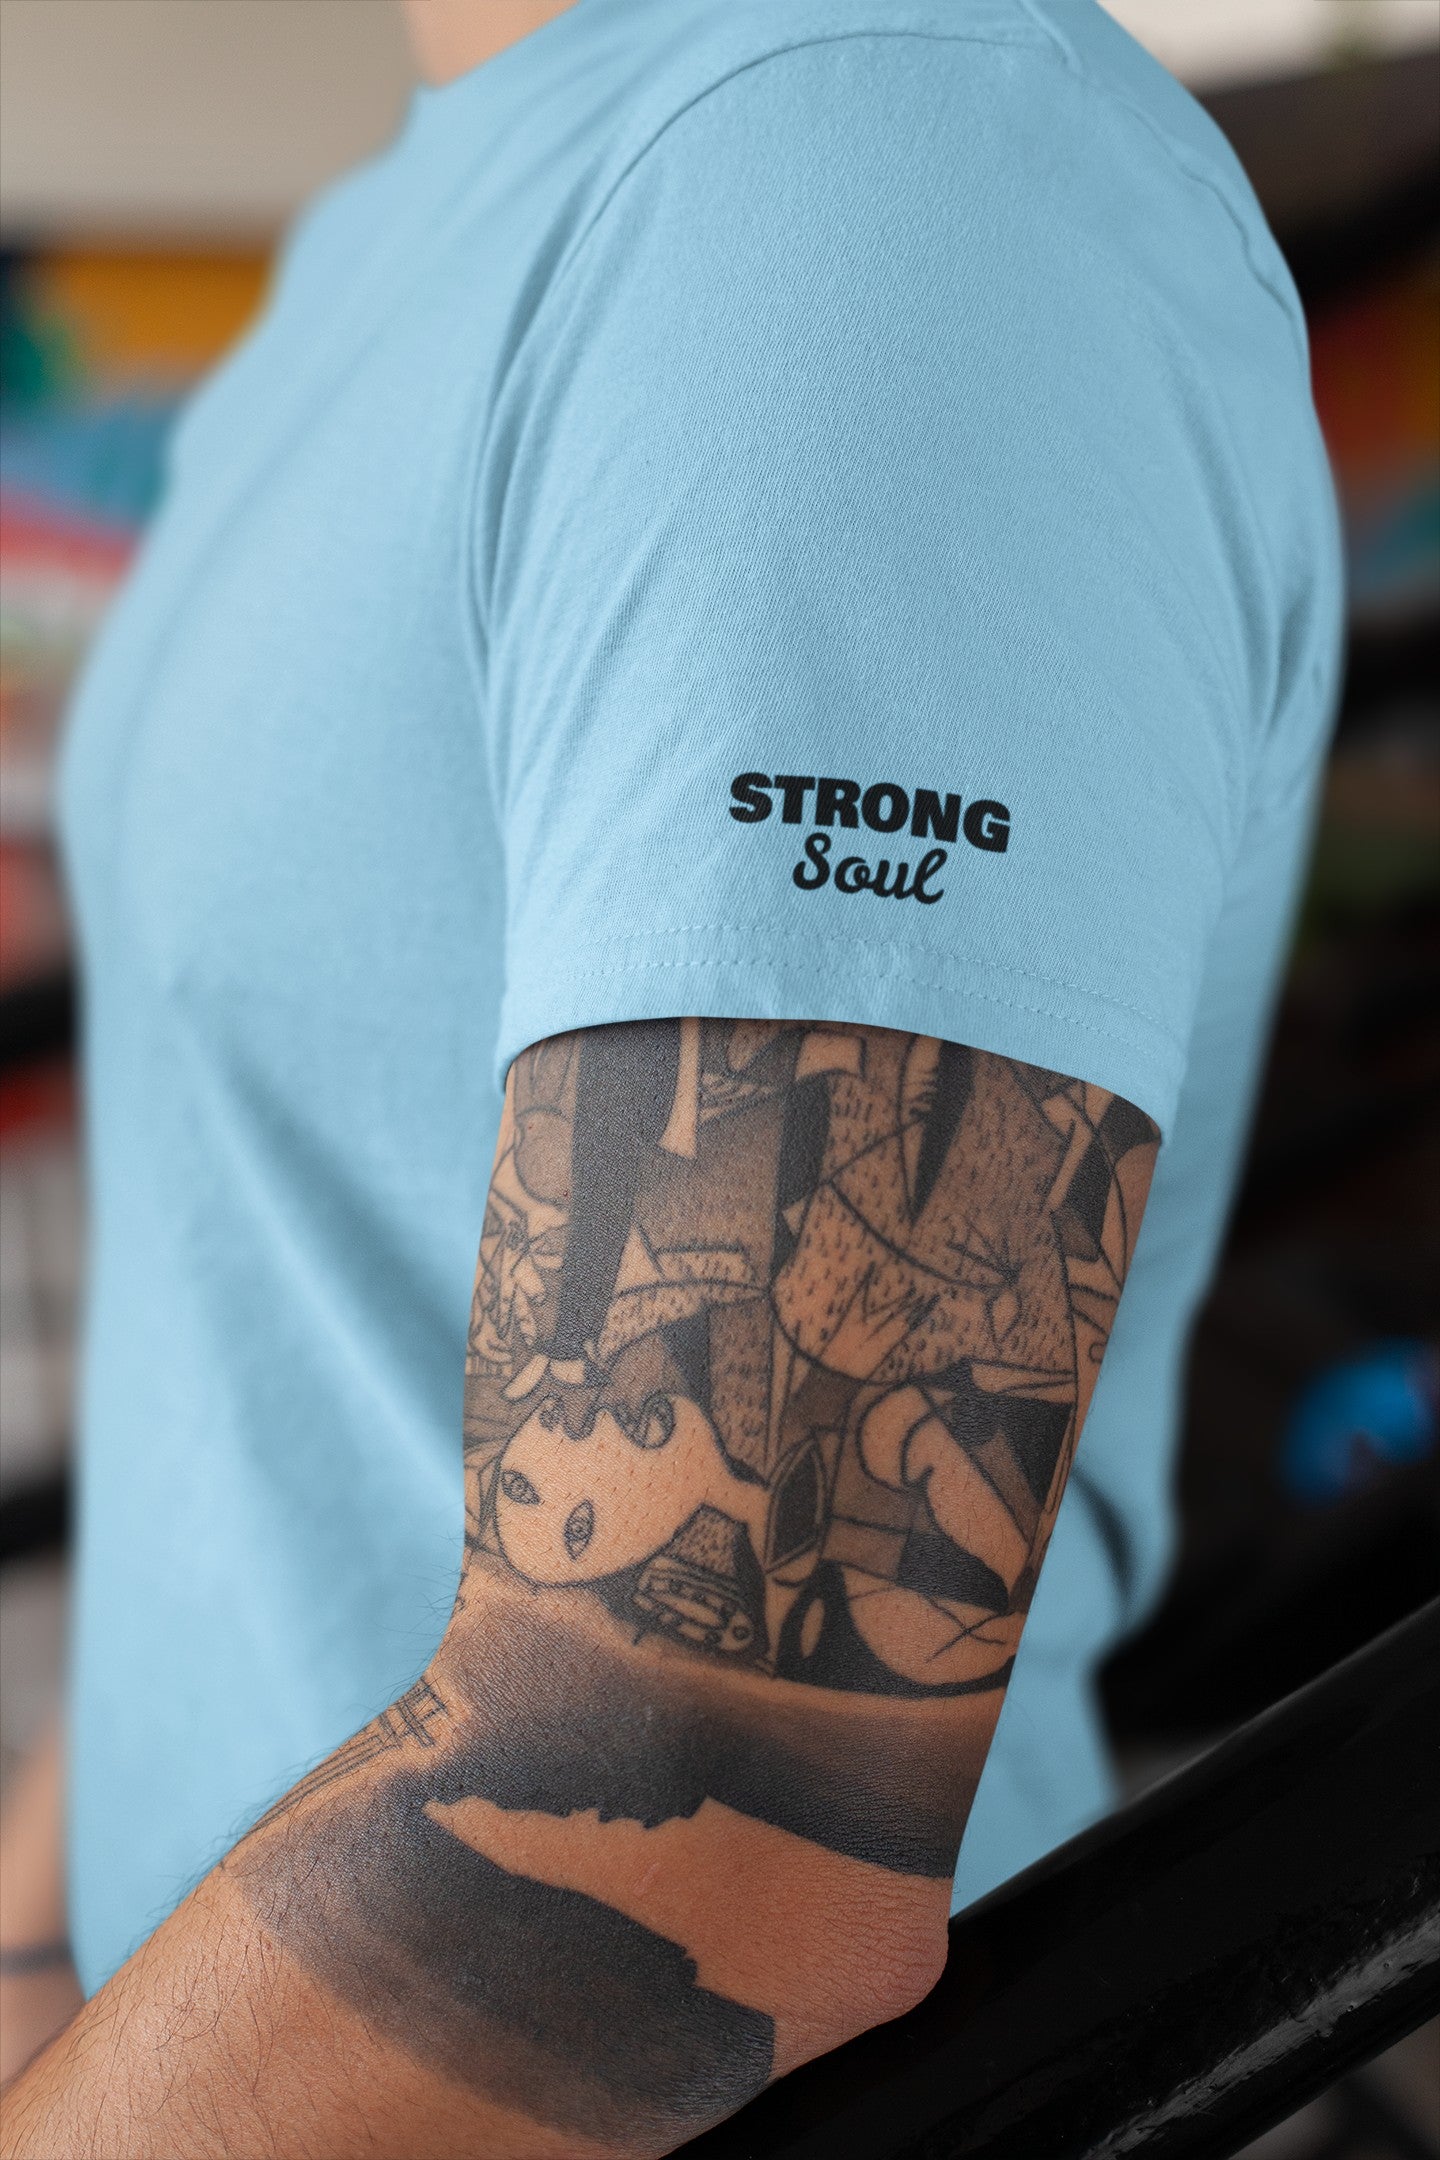 Gym T Shirt - Calm Like A Bomb with premium cotton Lycra. The Sports T Shirt by Strong Soul